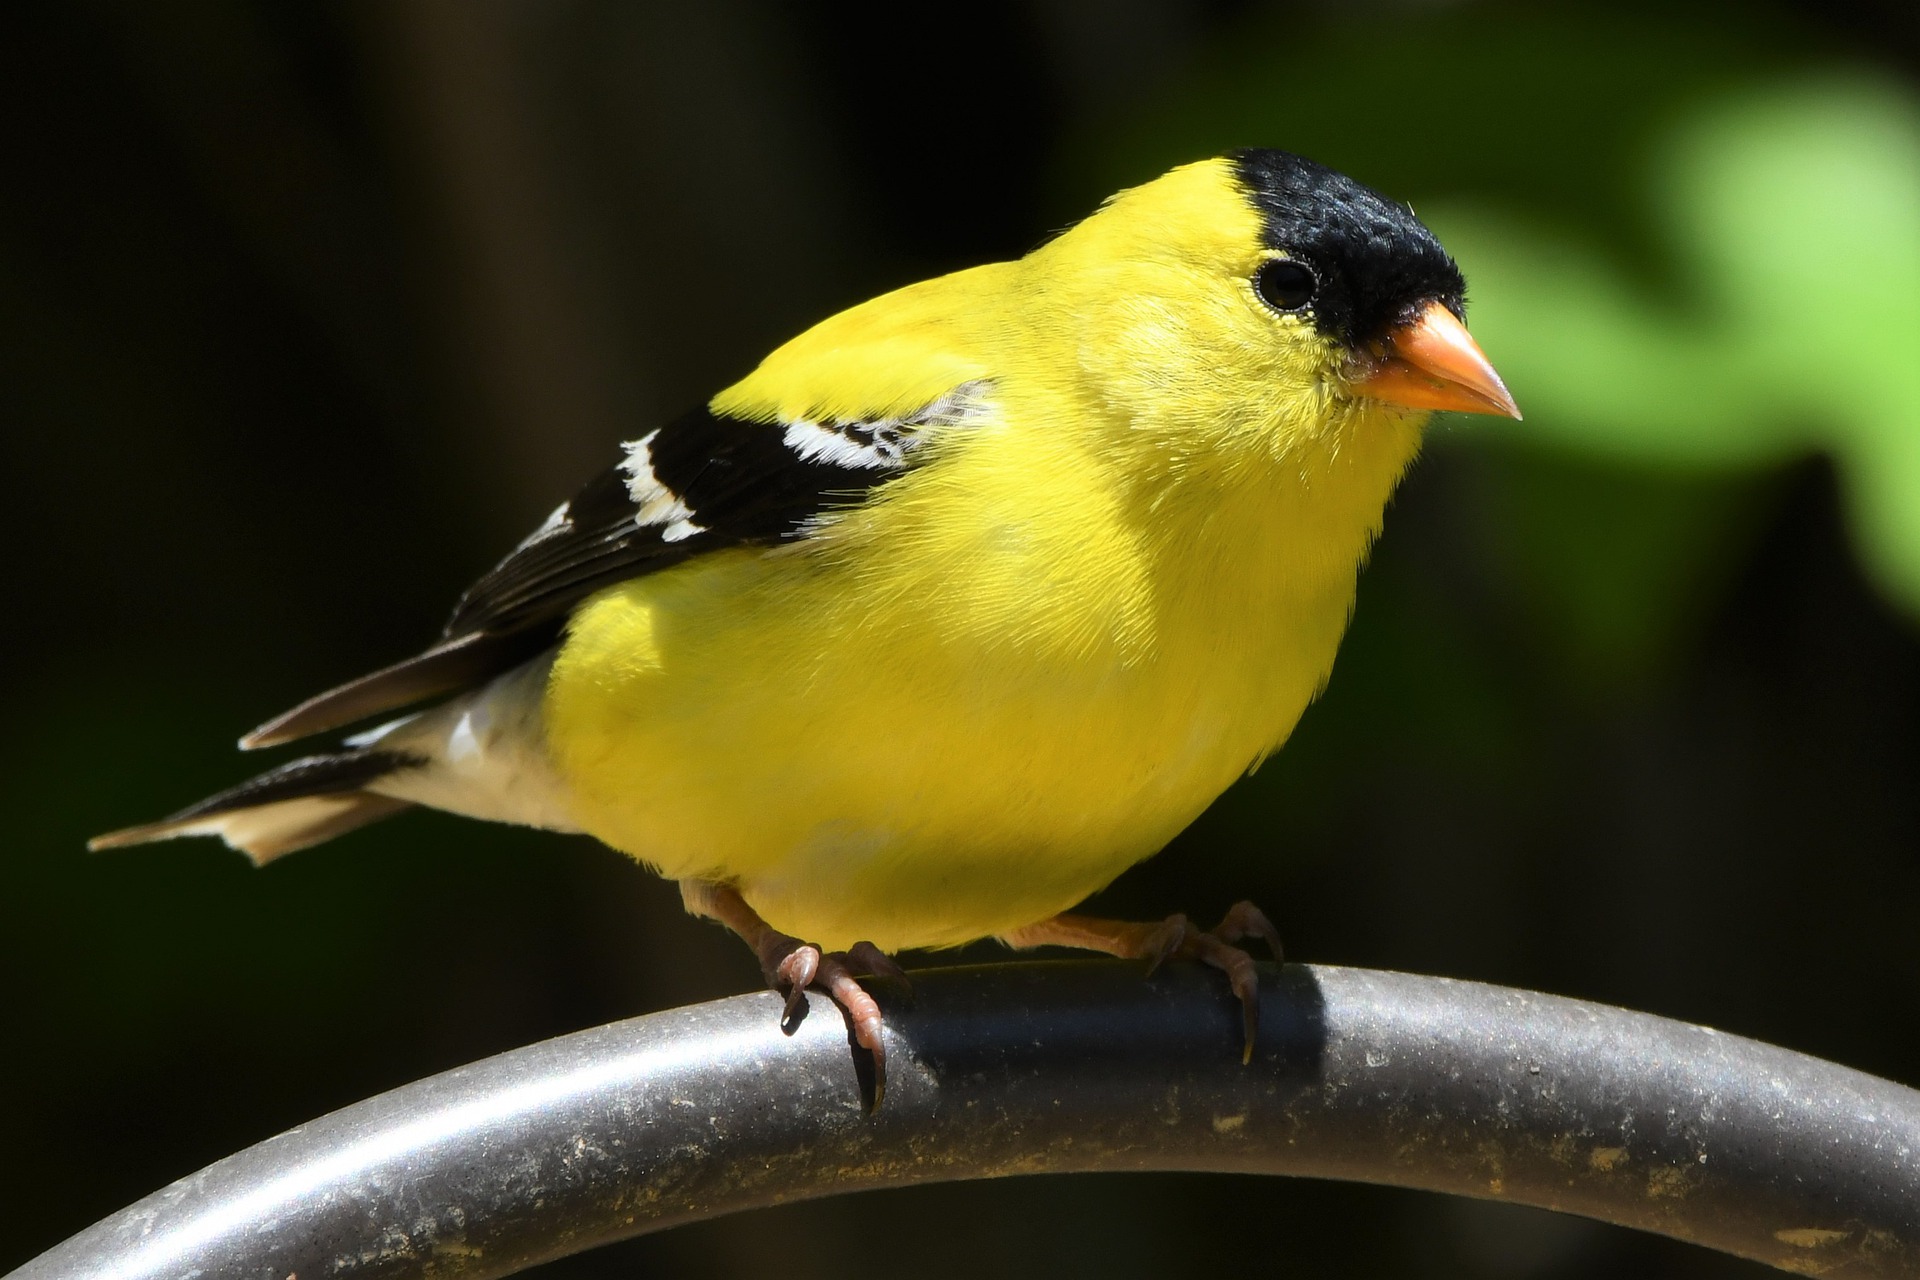 A backyard woodland landscape welcomes interesting wildlife like this American Goldfinch.